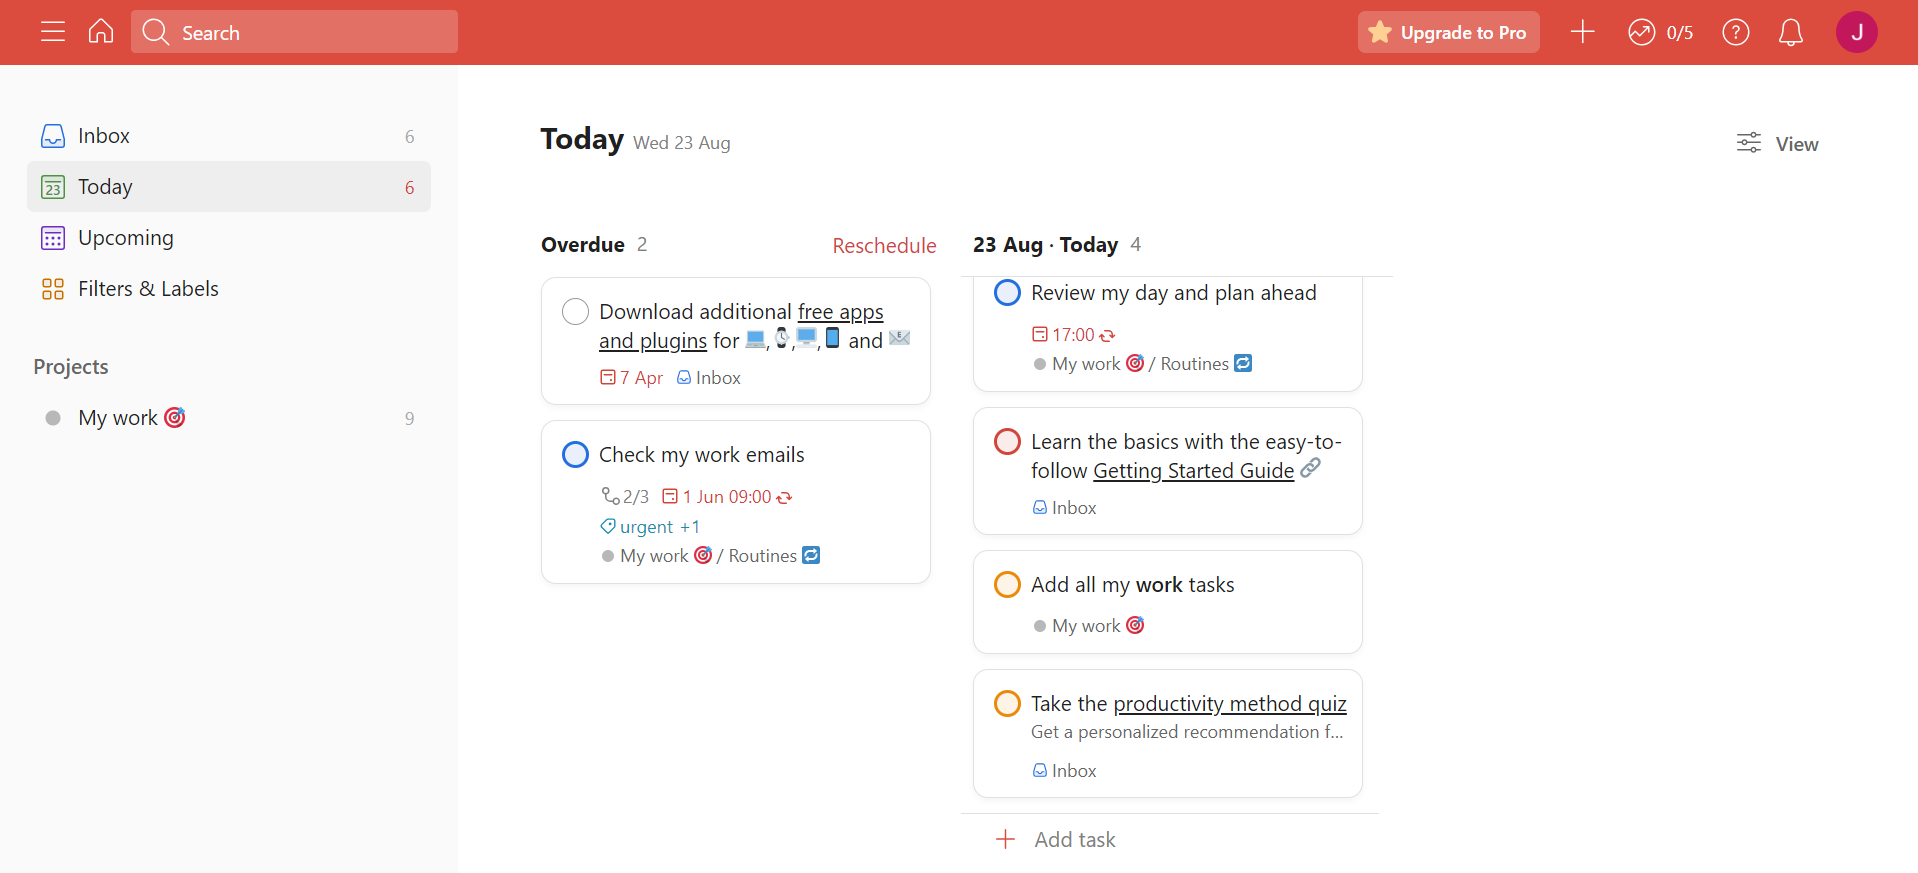 Todoist is a good daily planner app that stands out for a simplistic interface